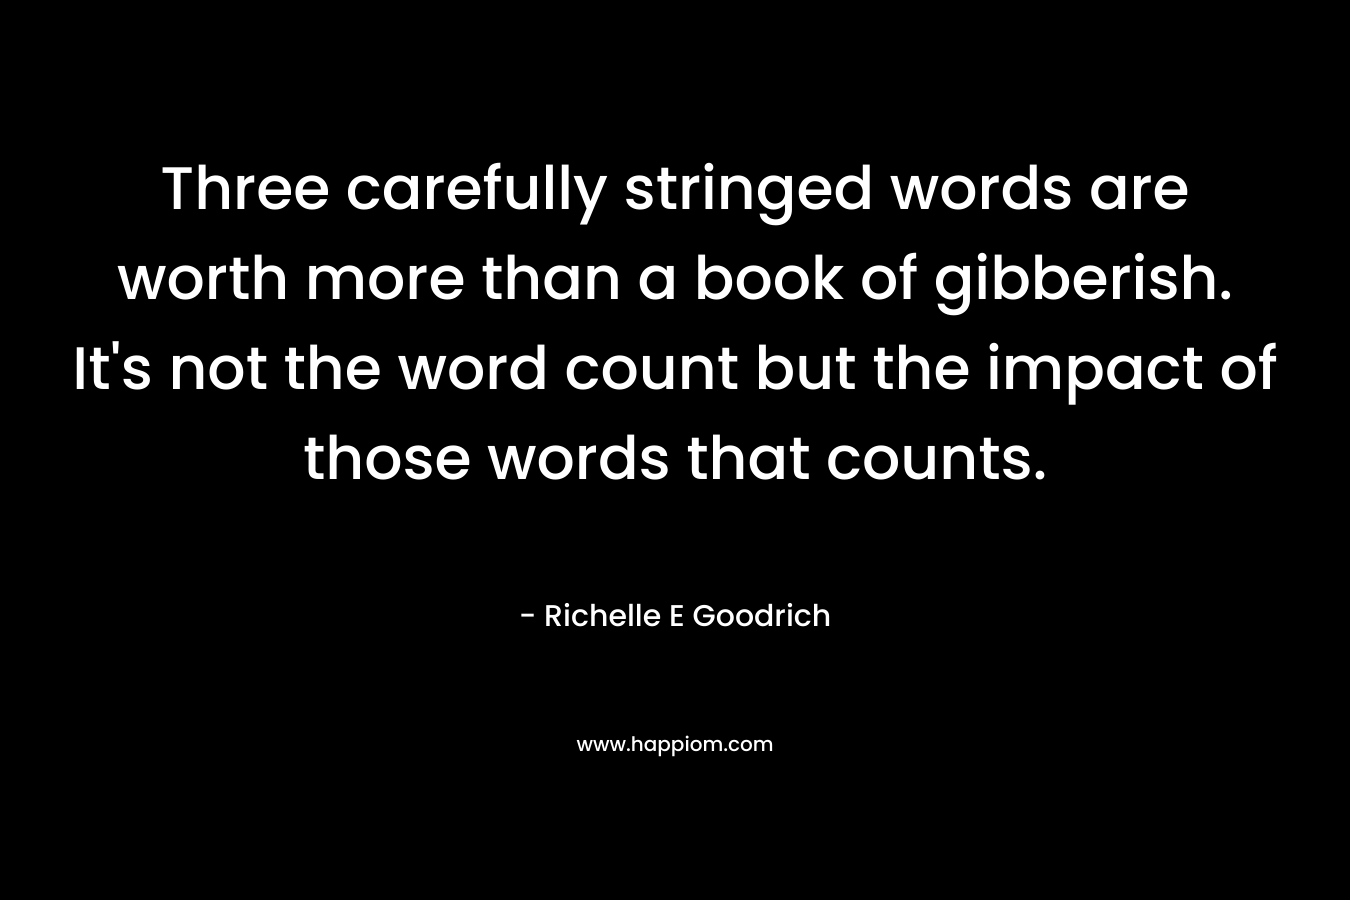 Three carefully stringed words are worth more than a book of gibberish. It's not the word count but the impact of those words that counts.